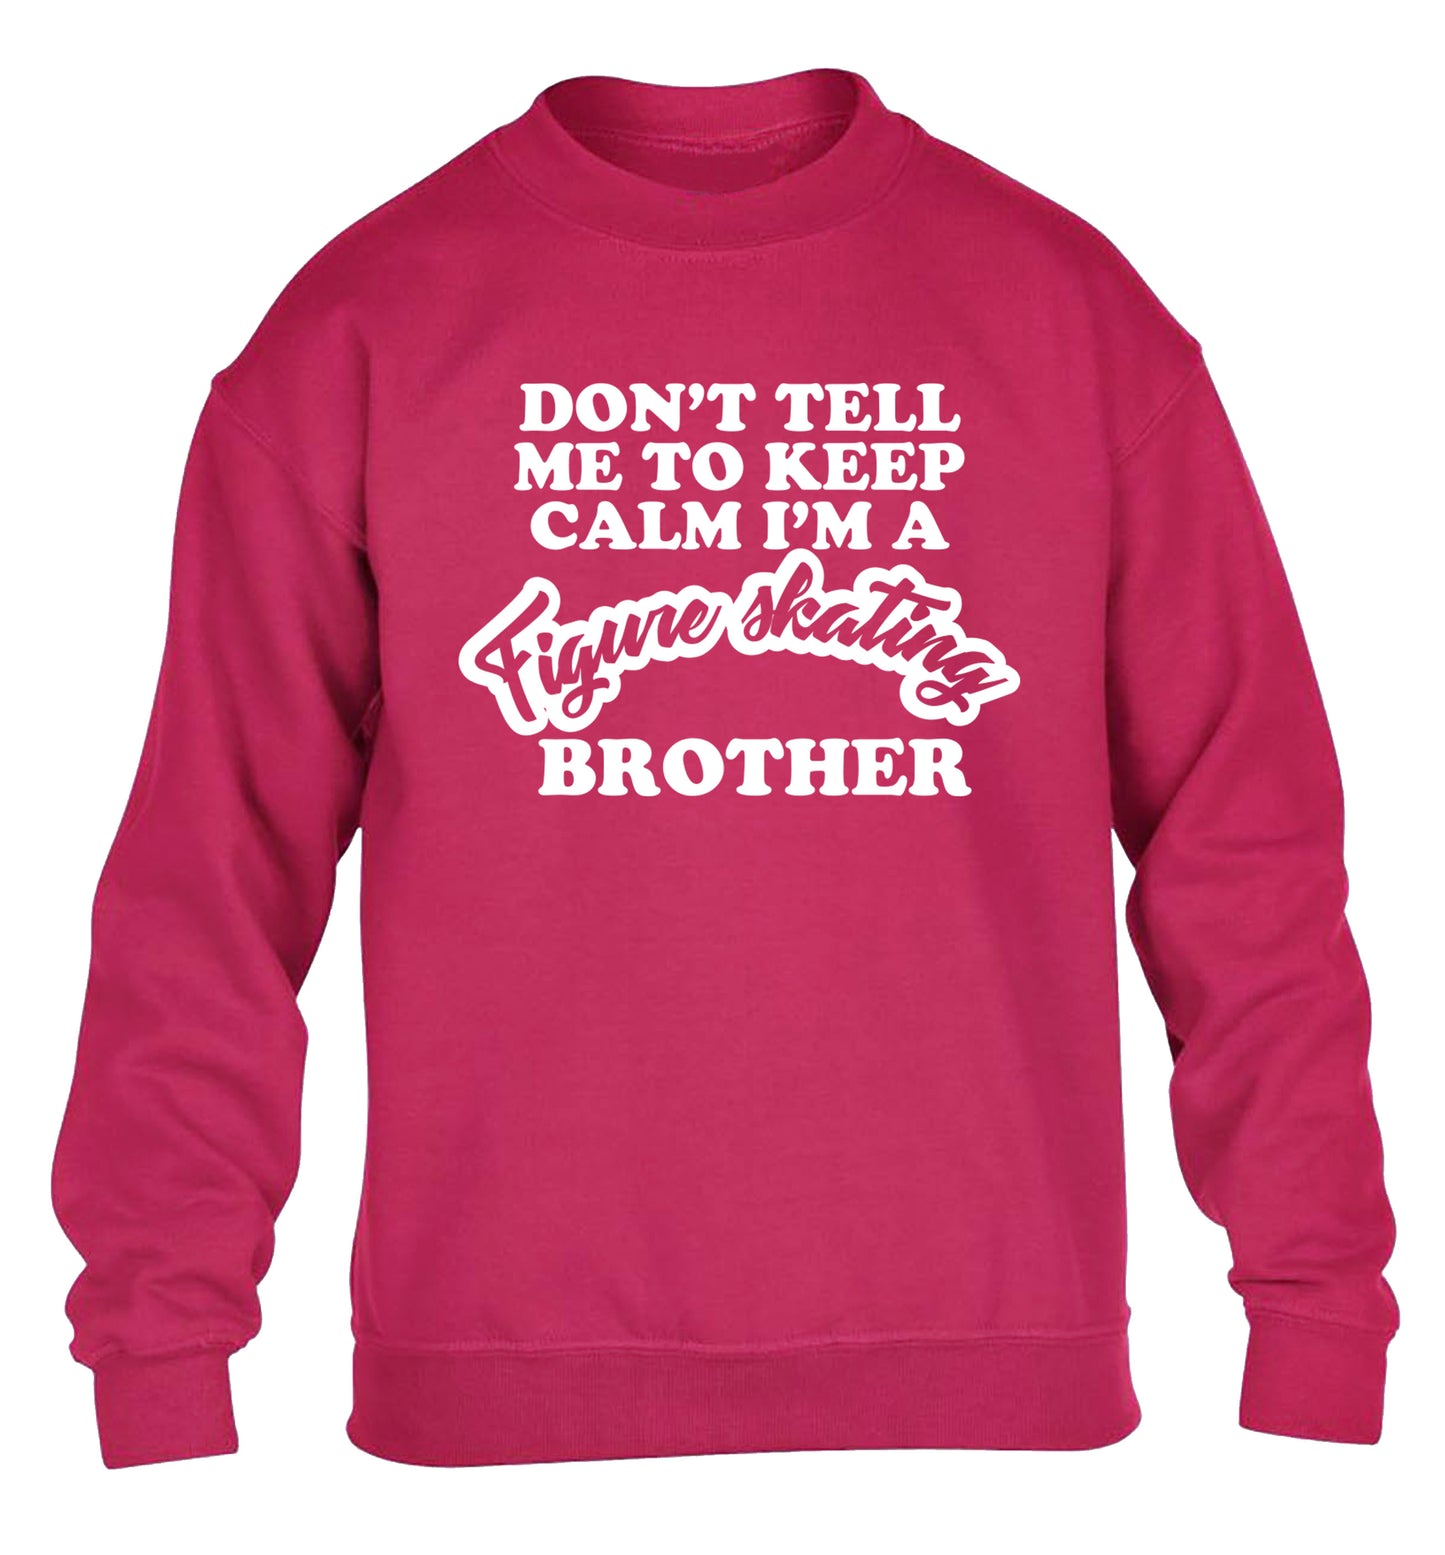 Don't tell me to keep calm I'm a figure skating brother children's pink sweater 12-14 Years